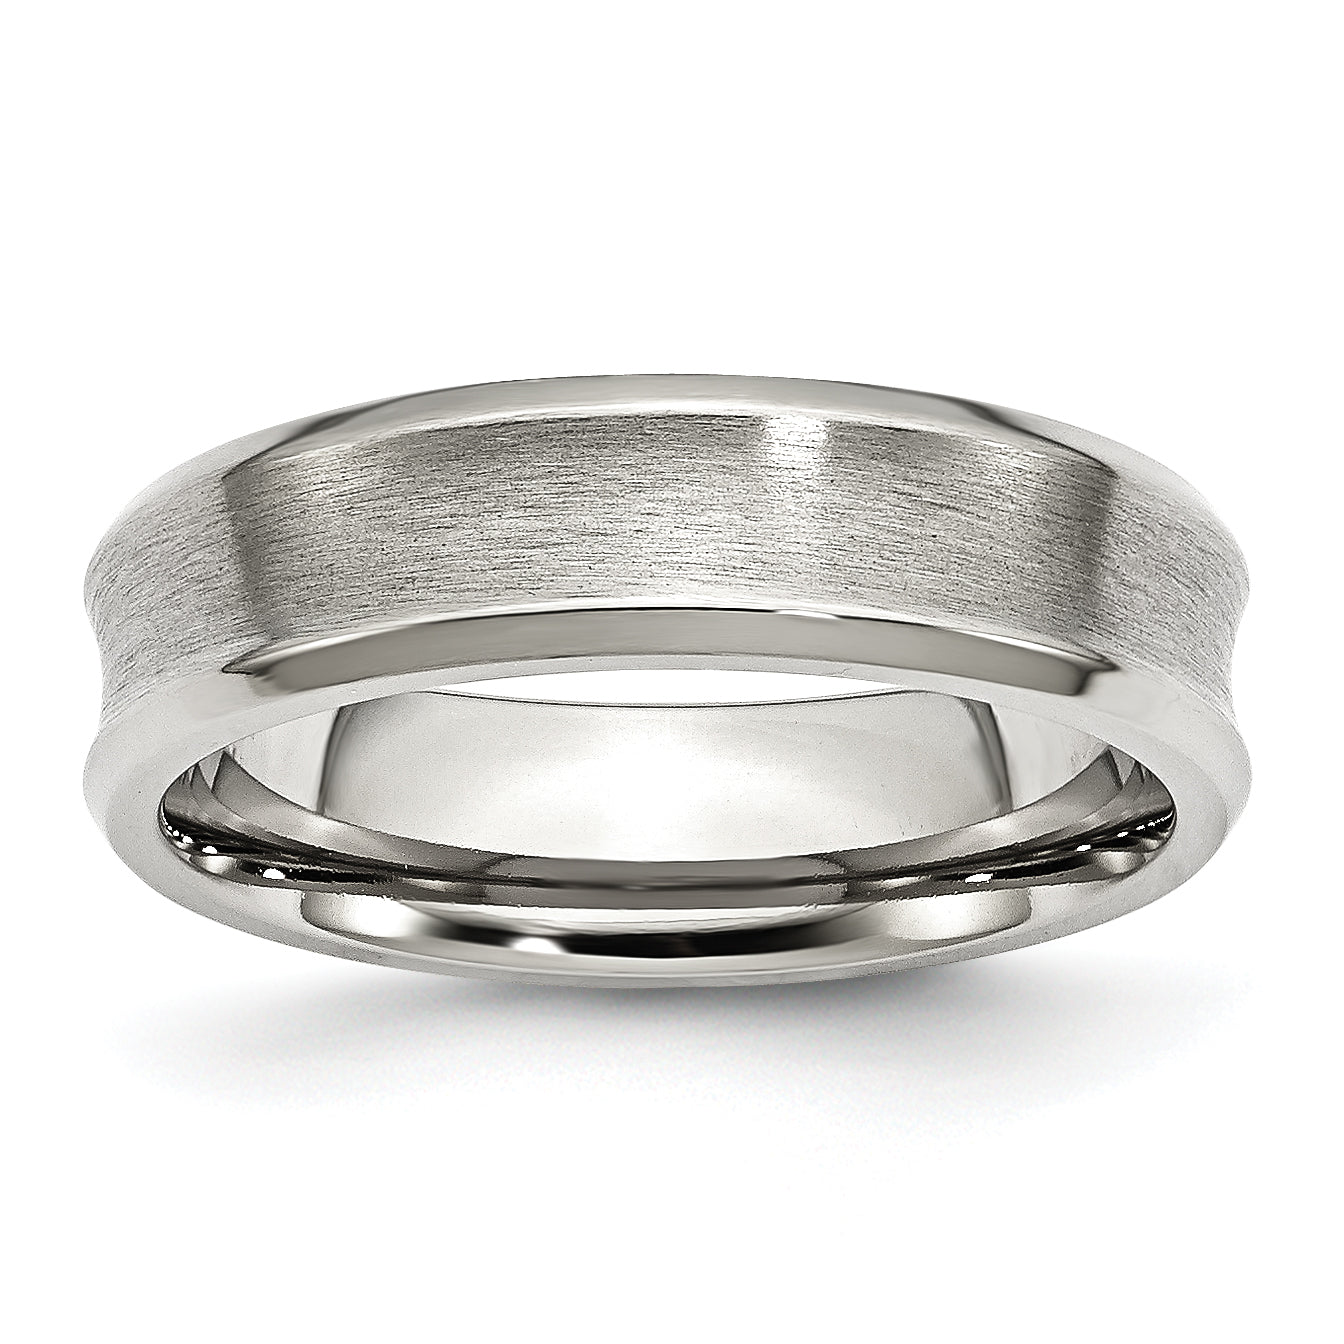 Stainless Steel Brushed and Polished Concave 6mm Beveled Edge Band